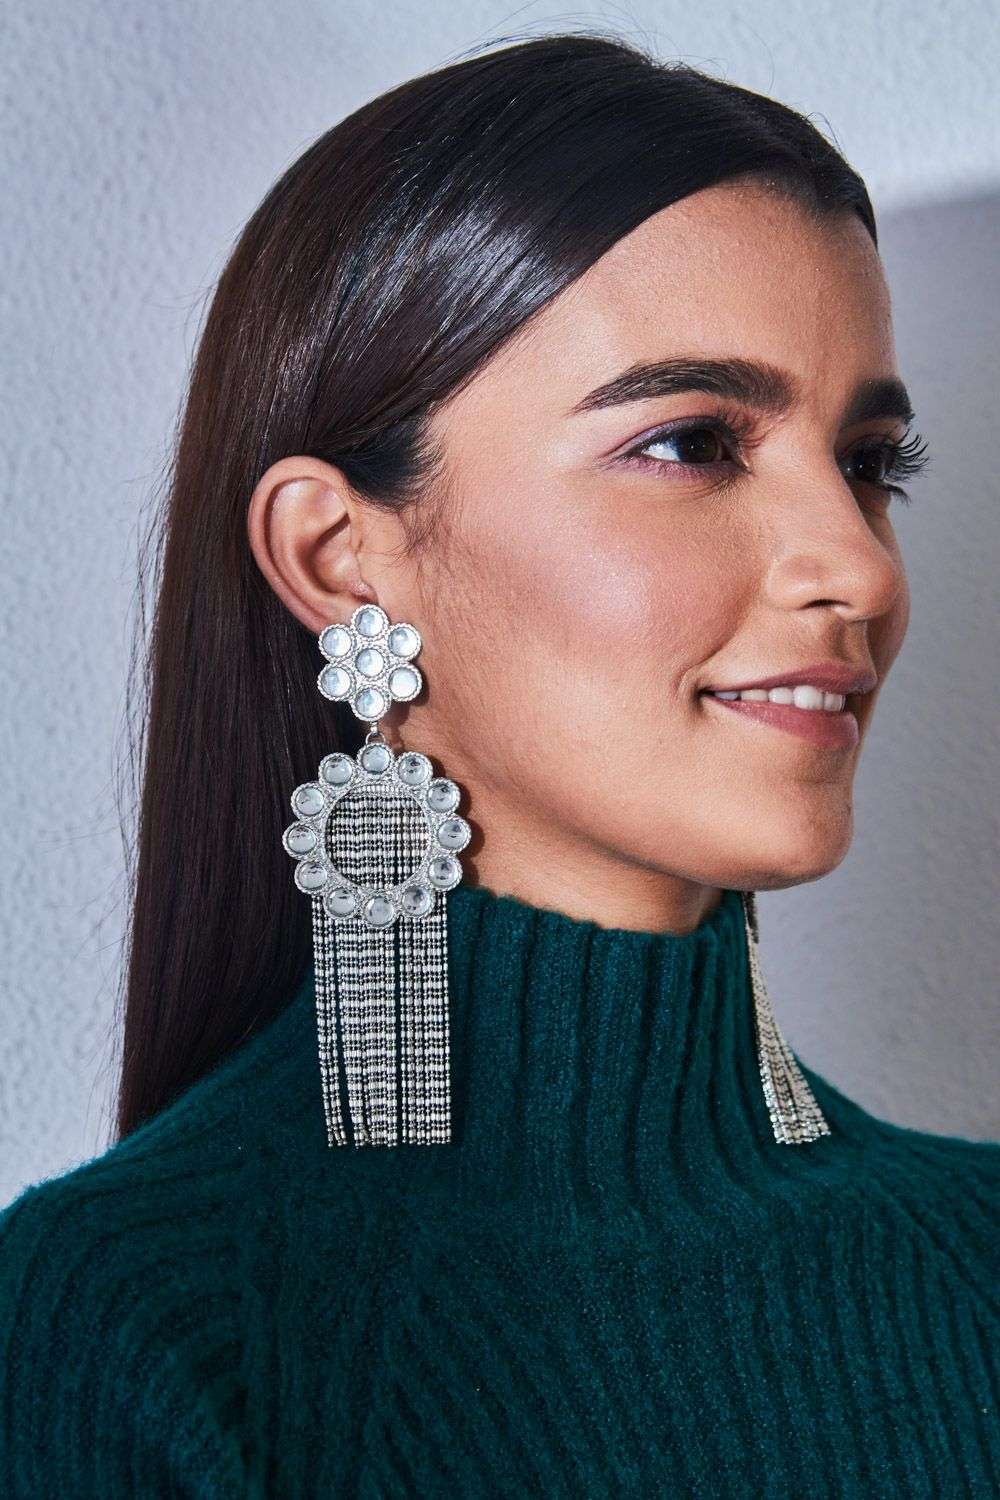 Statement Earrings Are The Stylish Star's Summer Essential | British Vogue